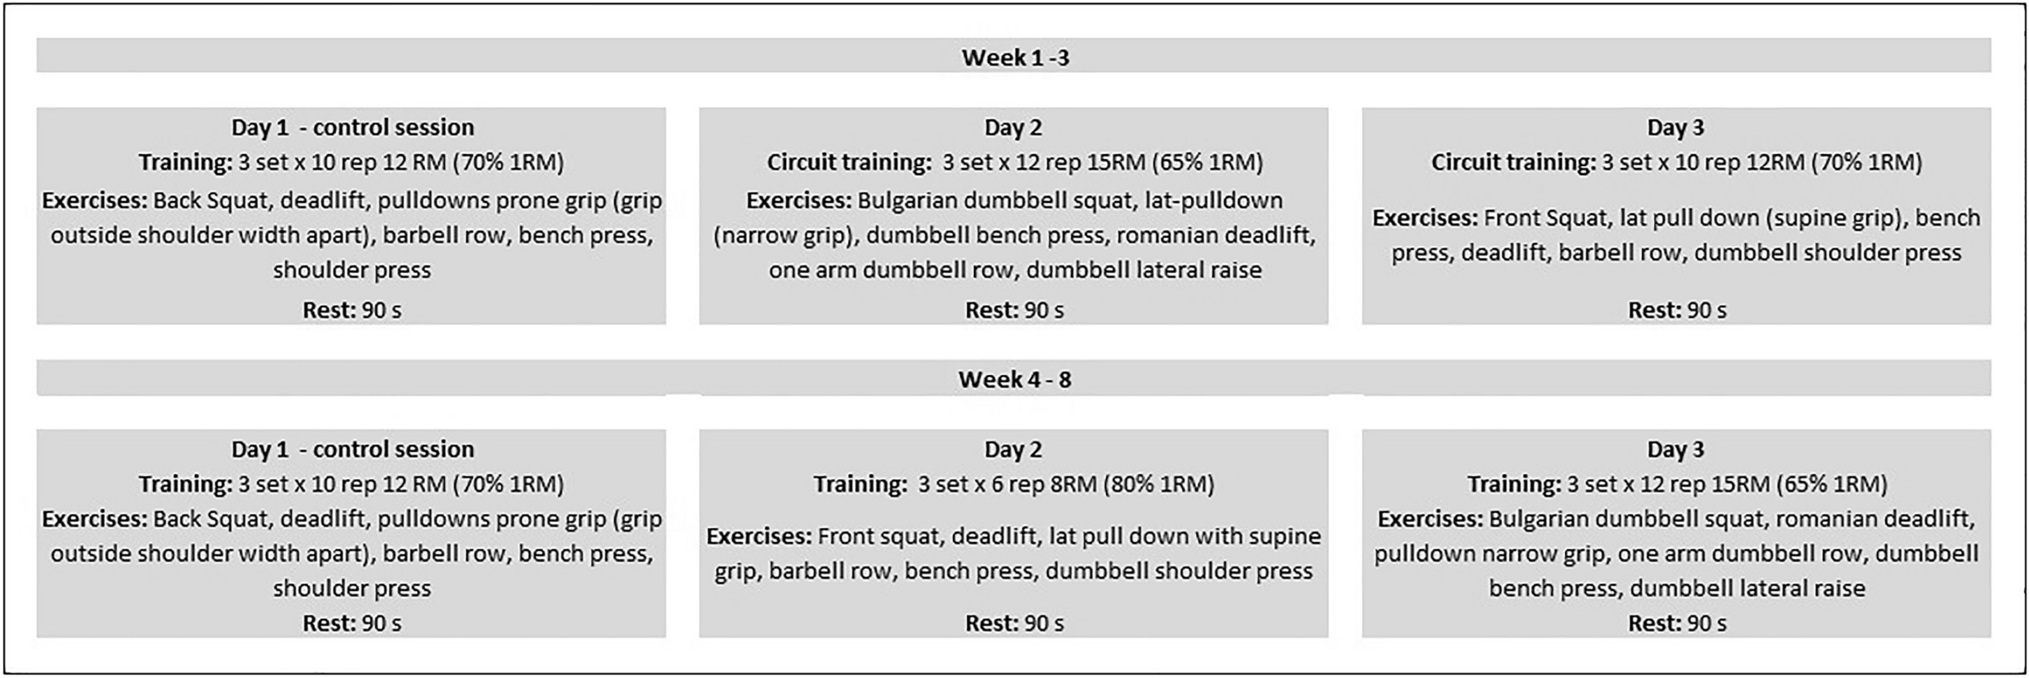 Hypoxia matters: comparison of external and internal training load markers during an 8-week resistance training program in normoxia, normobaric hypoxia and hypobaric hypoxia